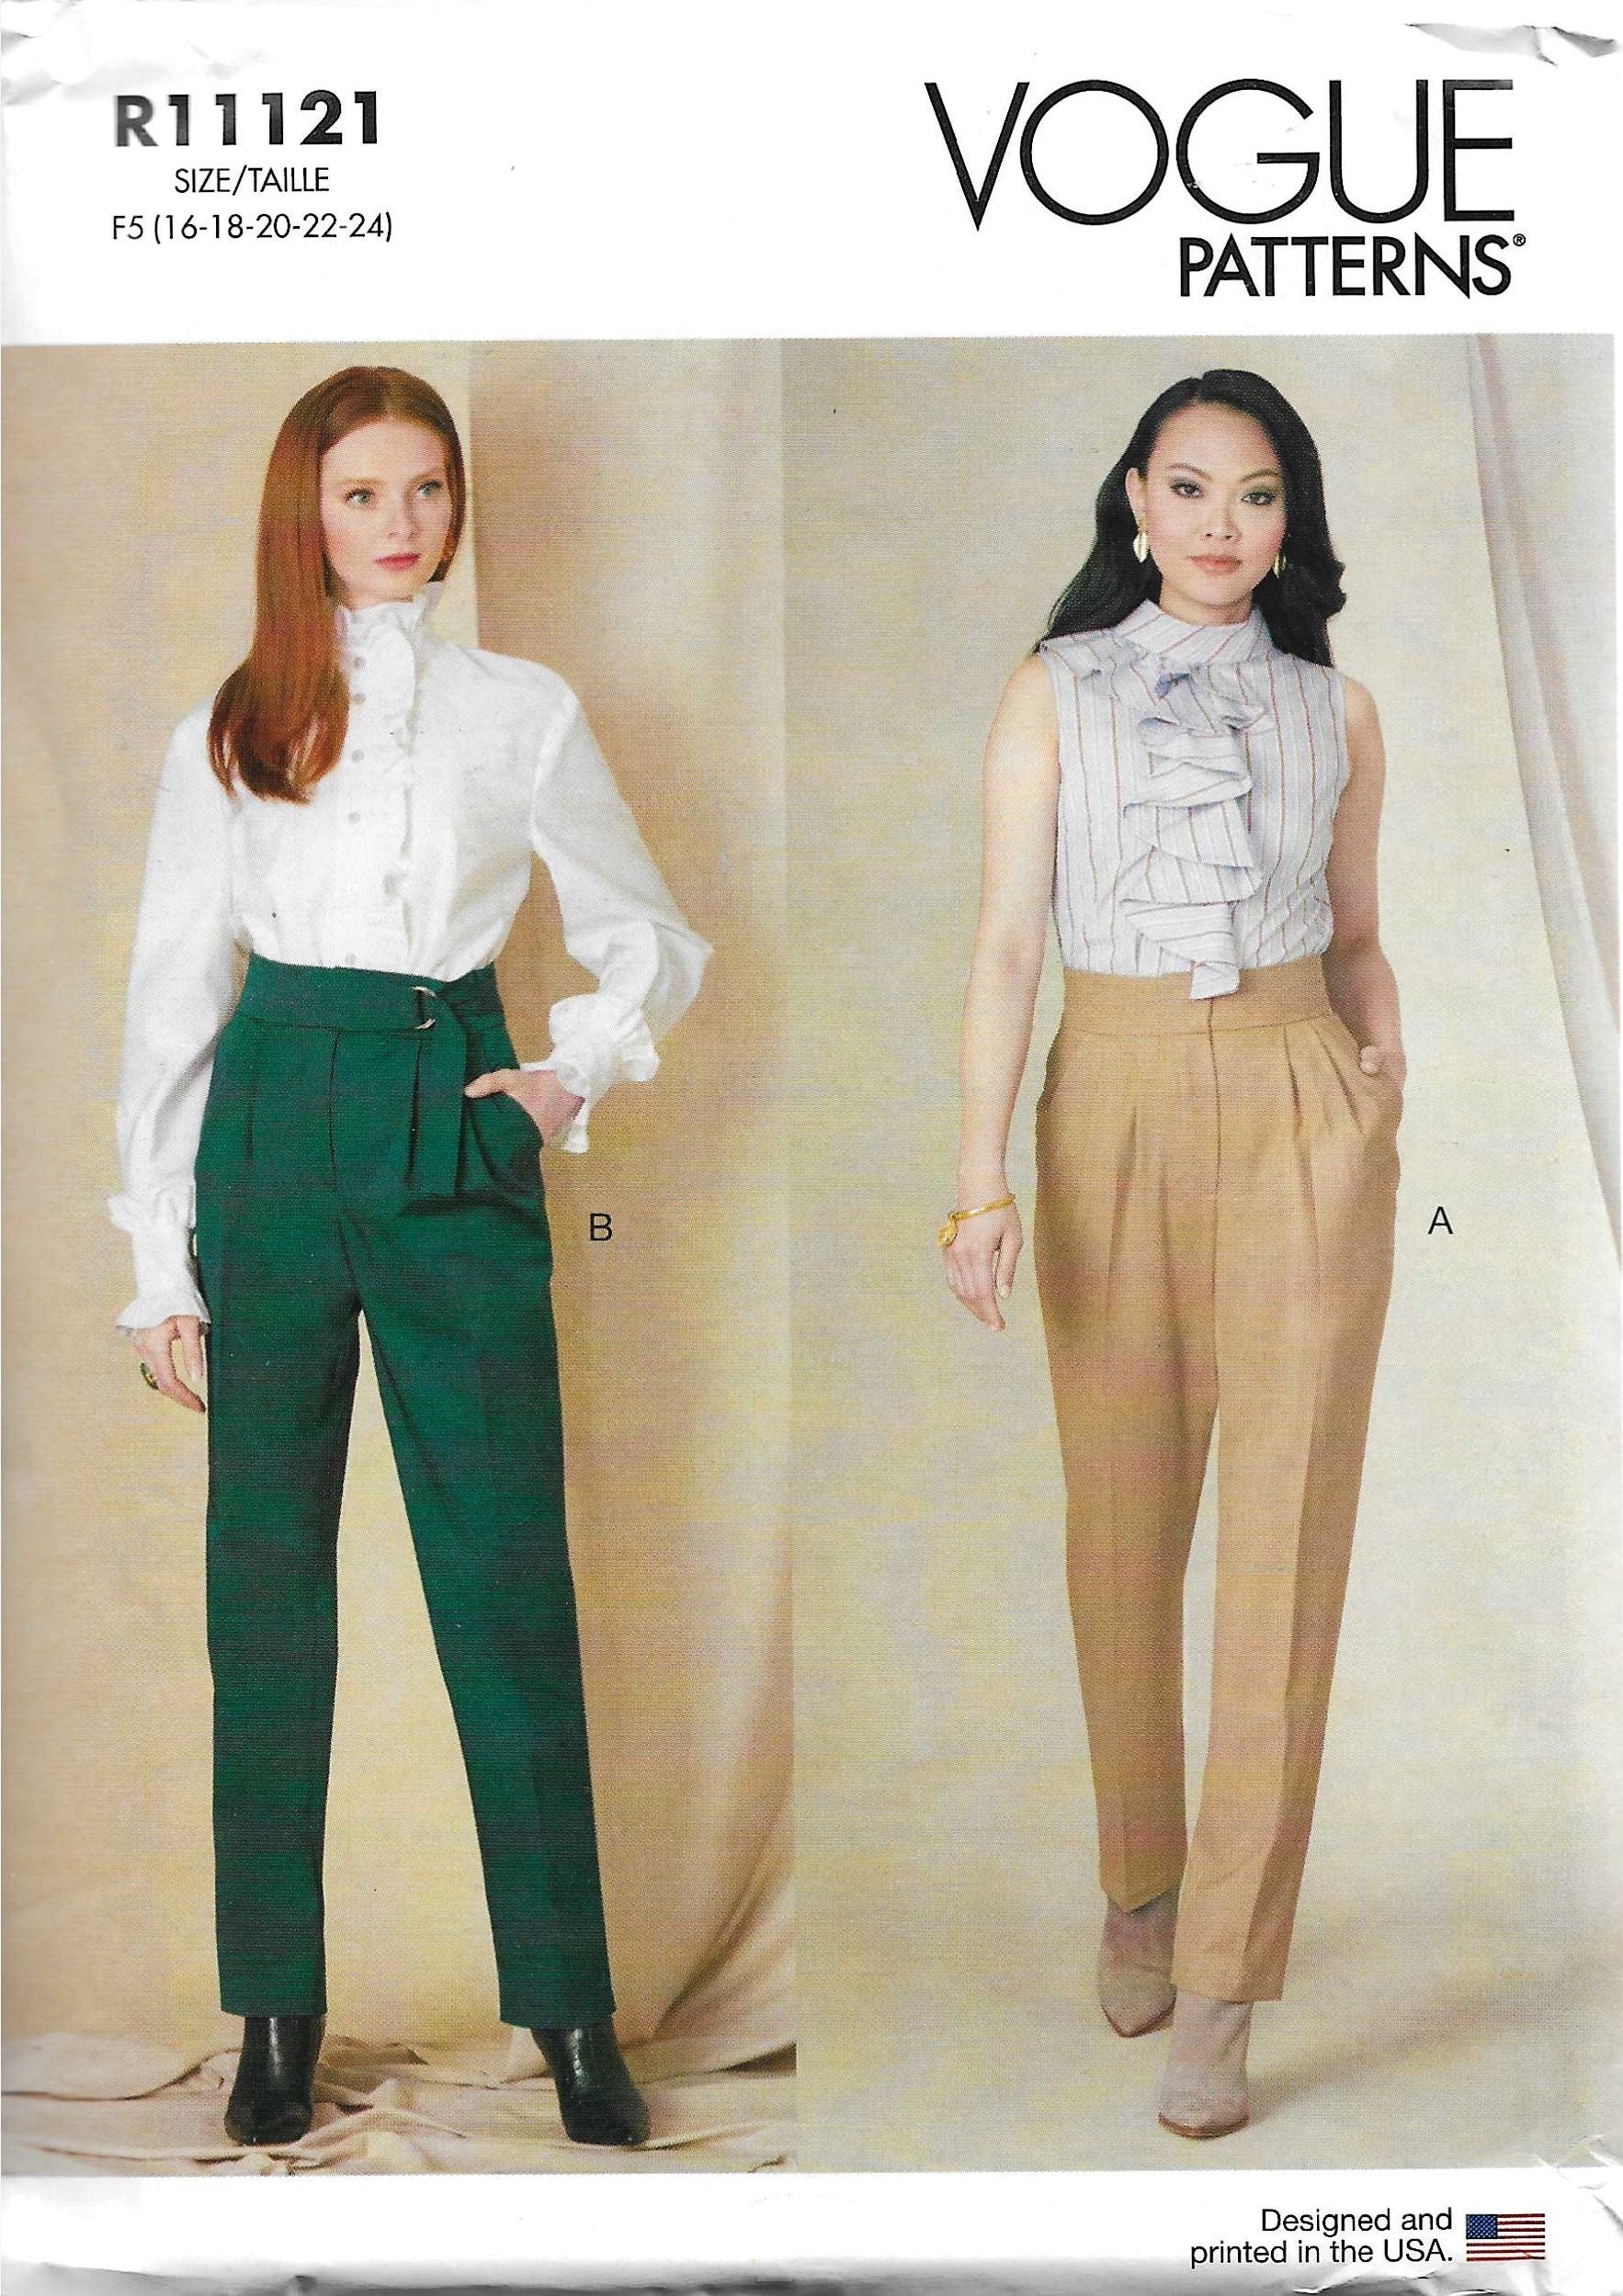 Purchase Kwik Sew 3853 Misses Tapered Pants and read its pattern reviews  Find other Pants sewing  Patterned dress pants Kwik sew patterns Pants  sewing pattern